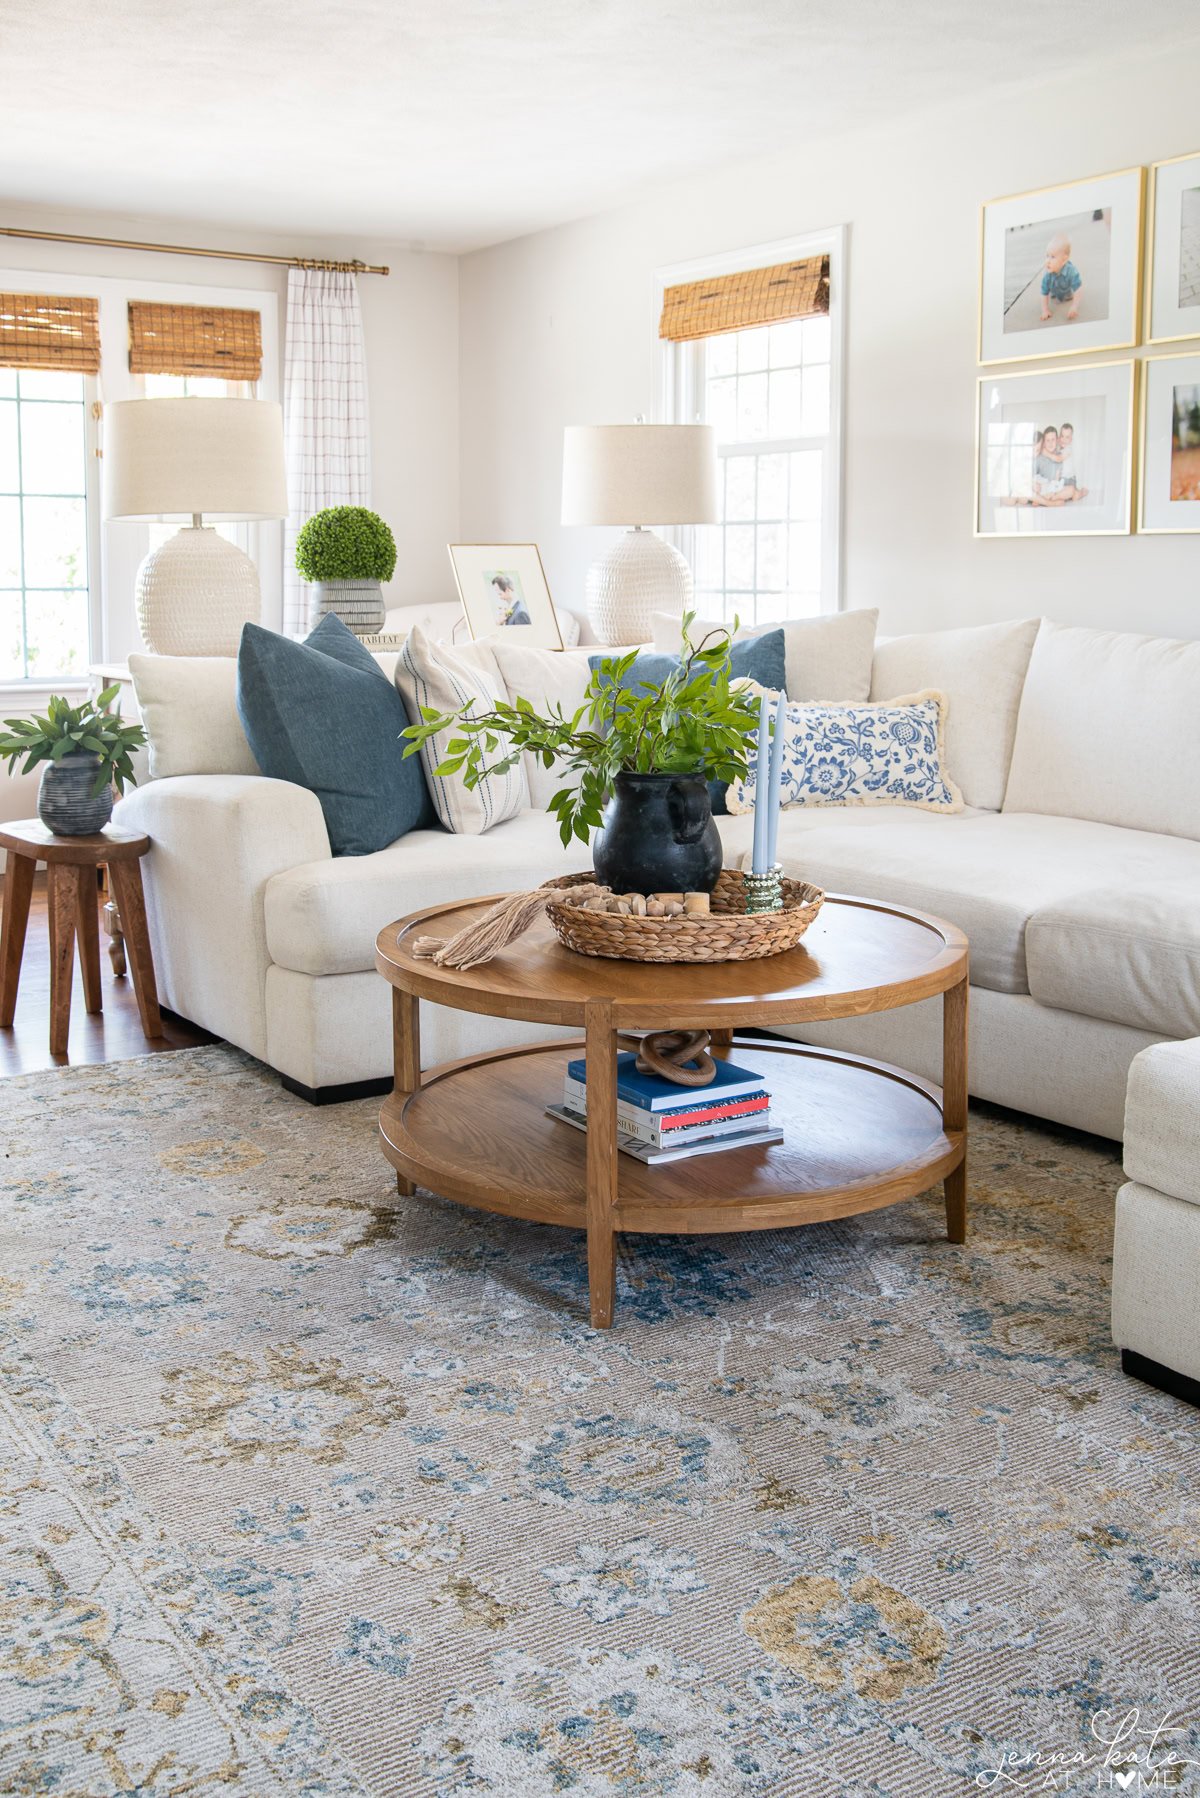 white couch with a round wooden coffee table with a vase of greenery.